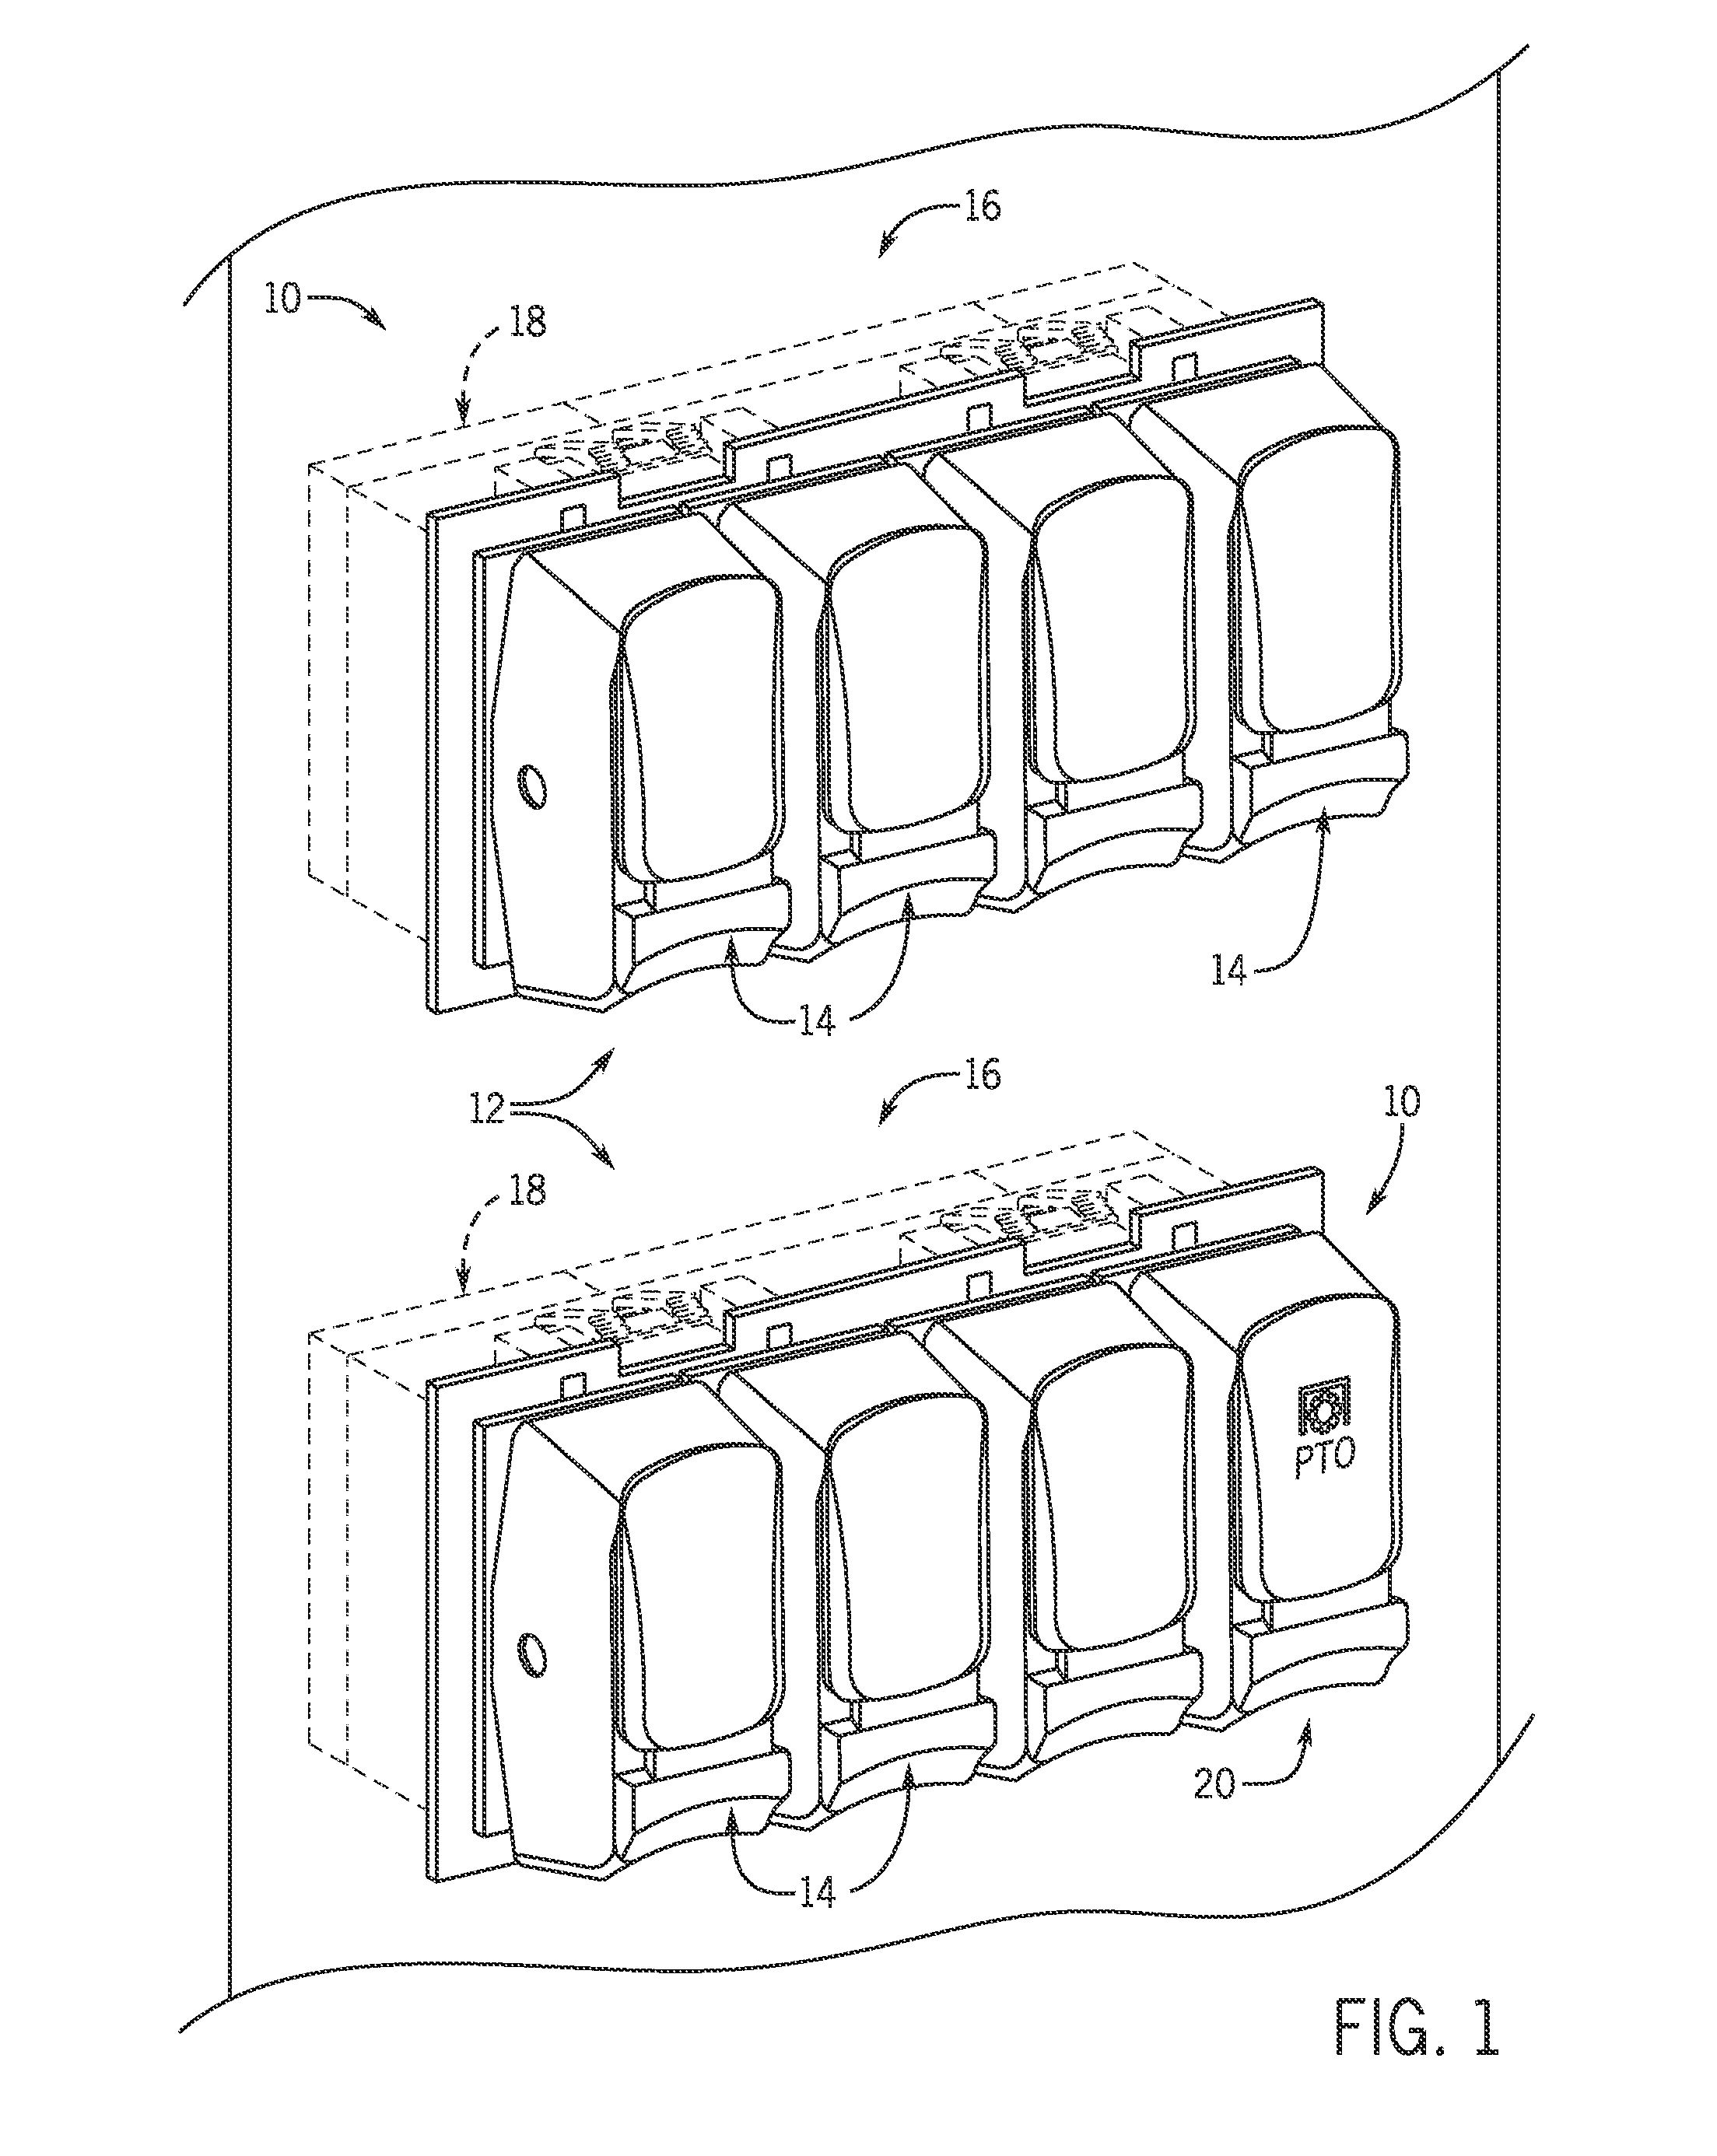 Vehicle control switch with capacitive touch redundancy actuation